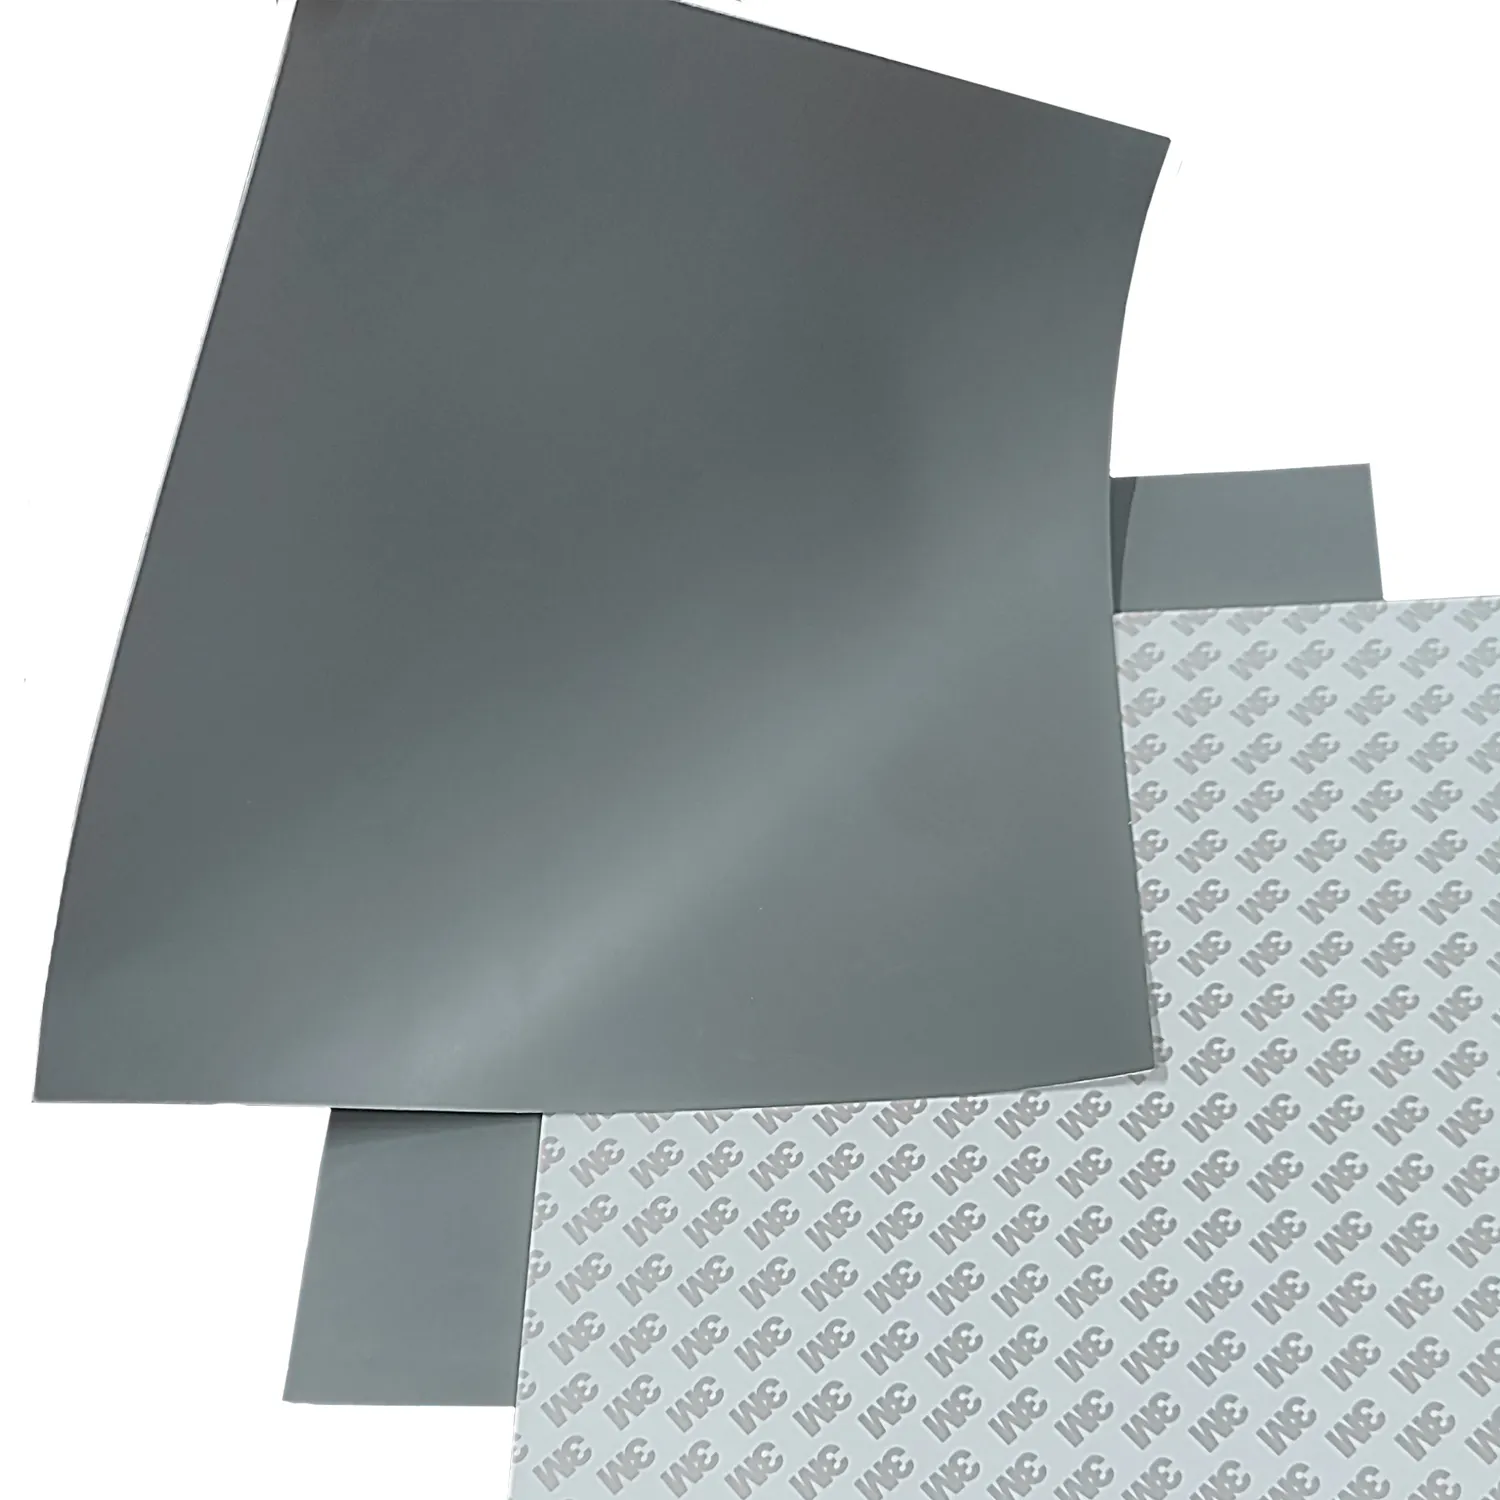 2-6GHz Wave Absorbing Material Elastic Silicone Rubber Sheet Filled with Carbonyl Iron Powder